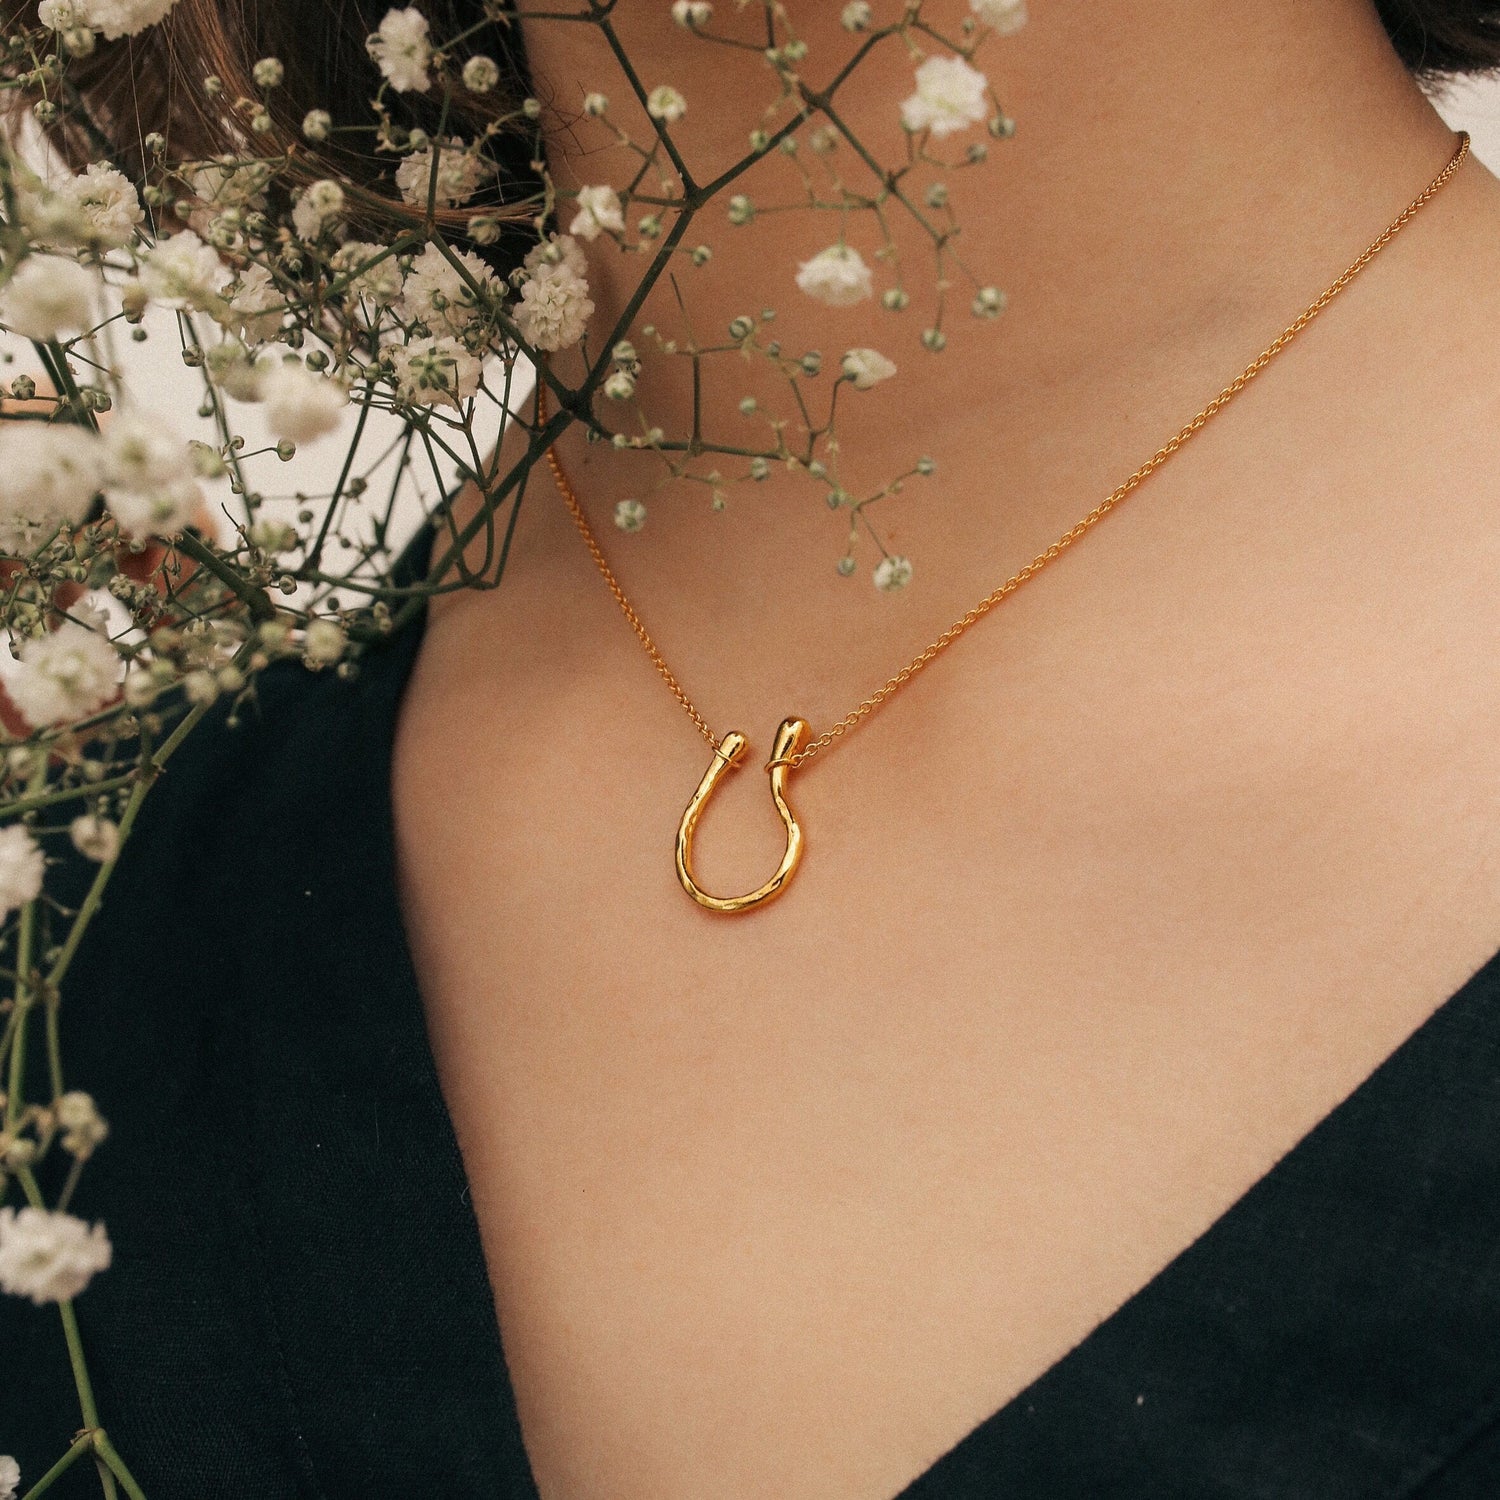 Chia Necklace - Solid Gold